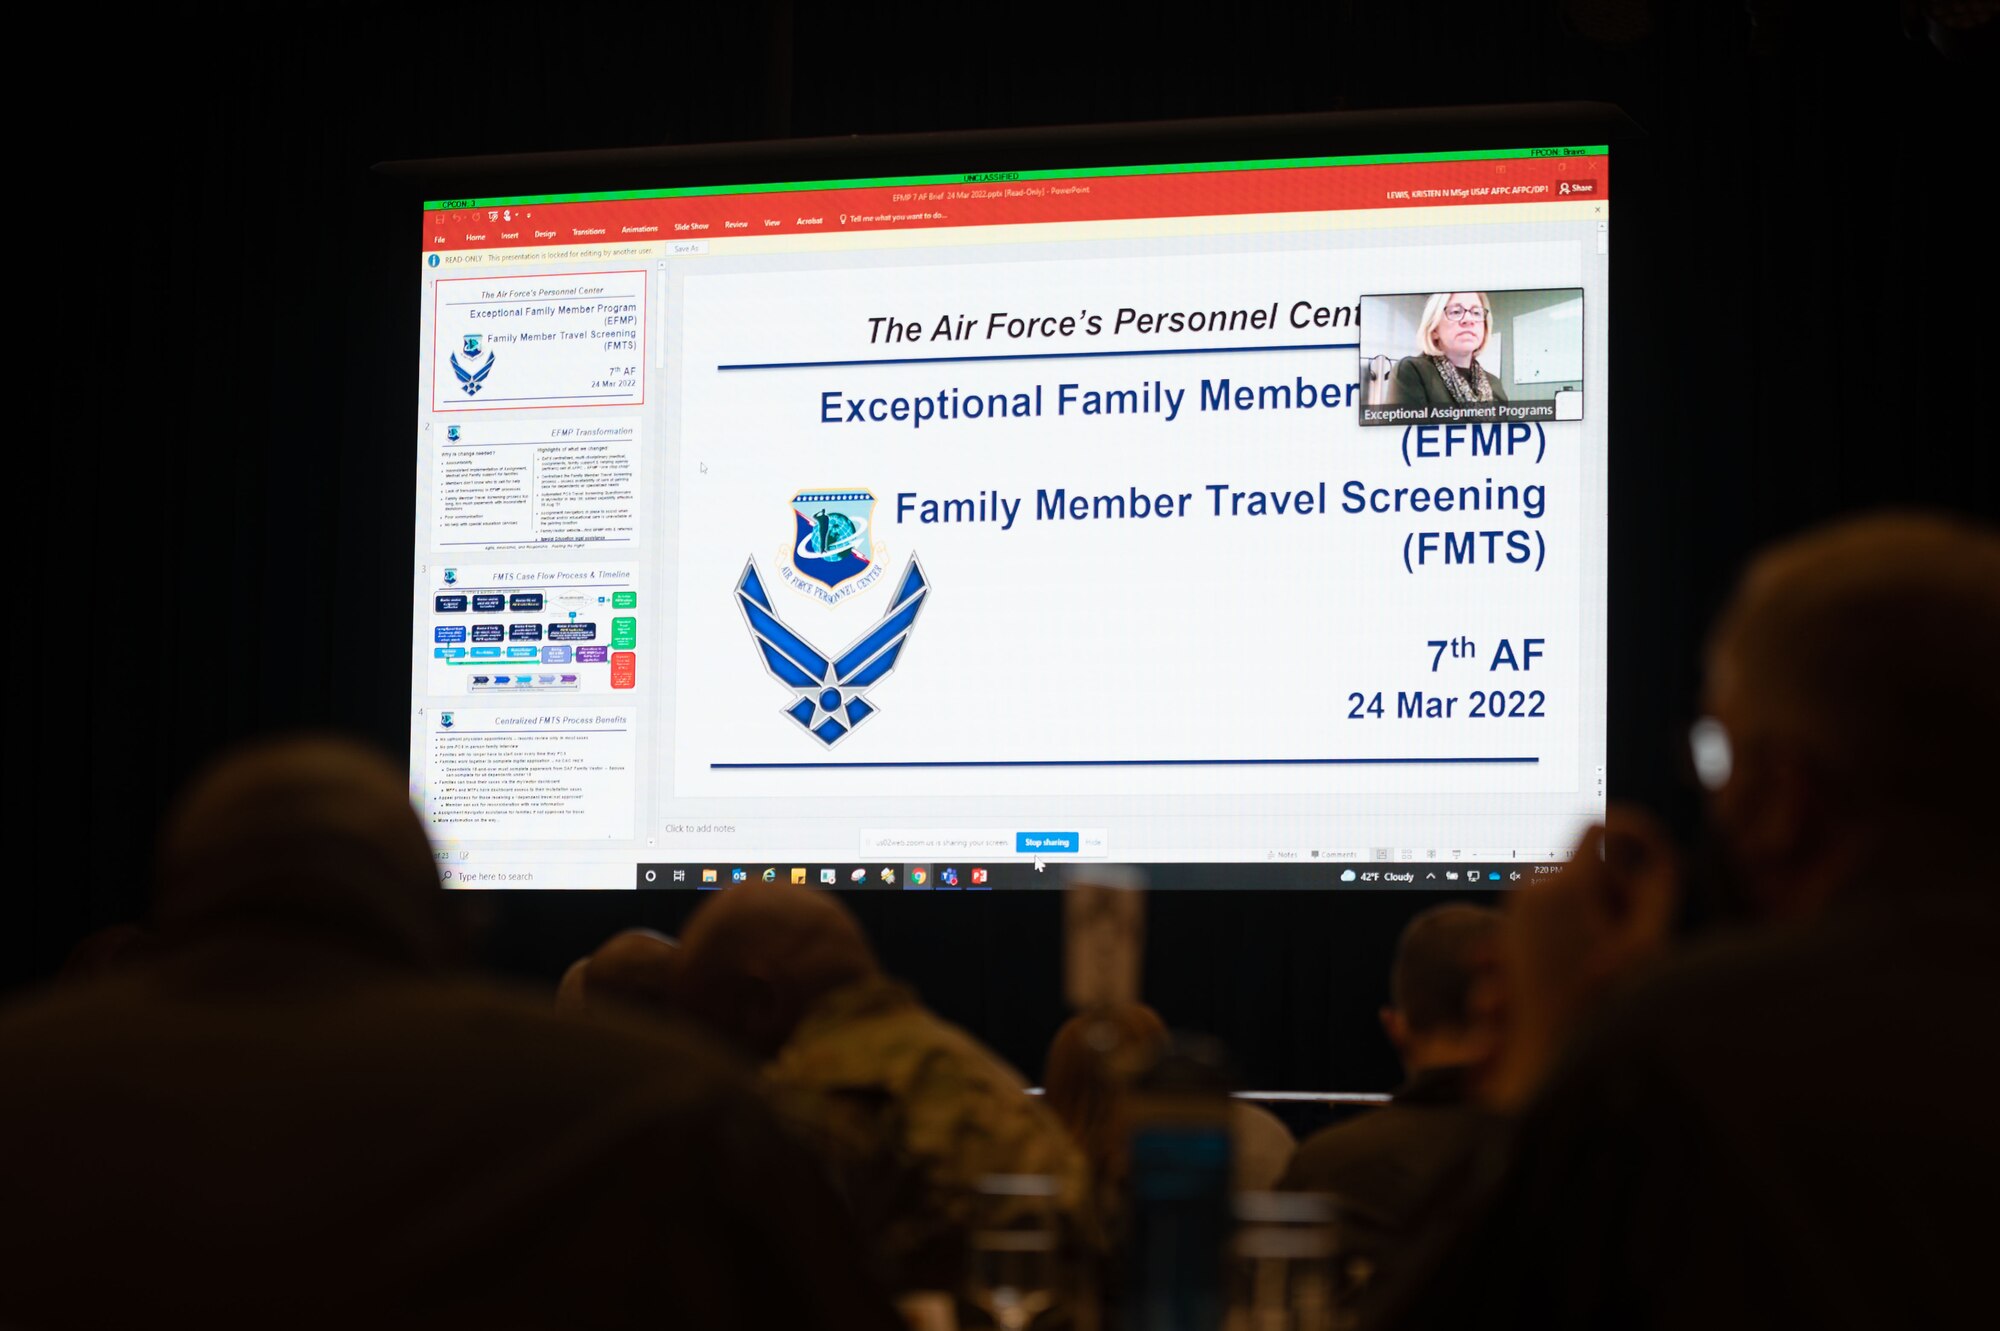 Tammy Hern, 51st Force Support Squadron airman and family program coordinator, briefs attendees on the exceptional family member program during a commander’s conference at Osan Air Base, Republic of Korea, Mar. 24, 2022. (U.S. Air Force photo by Senior Airman Megan Estrada)